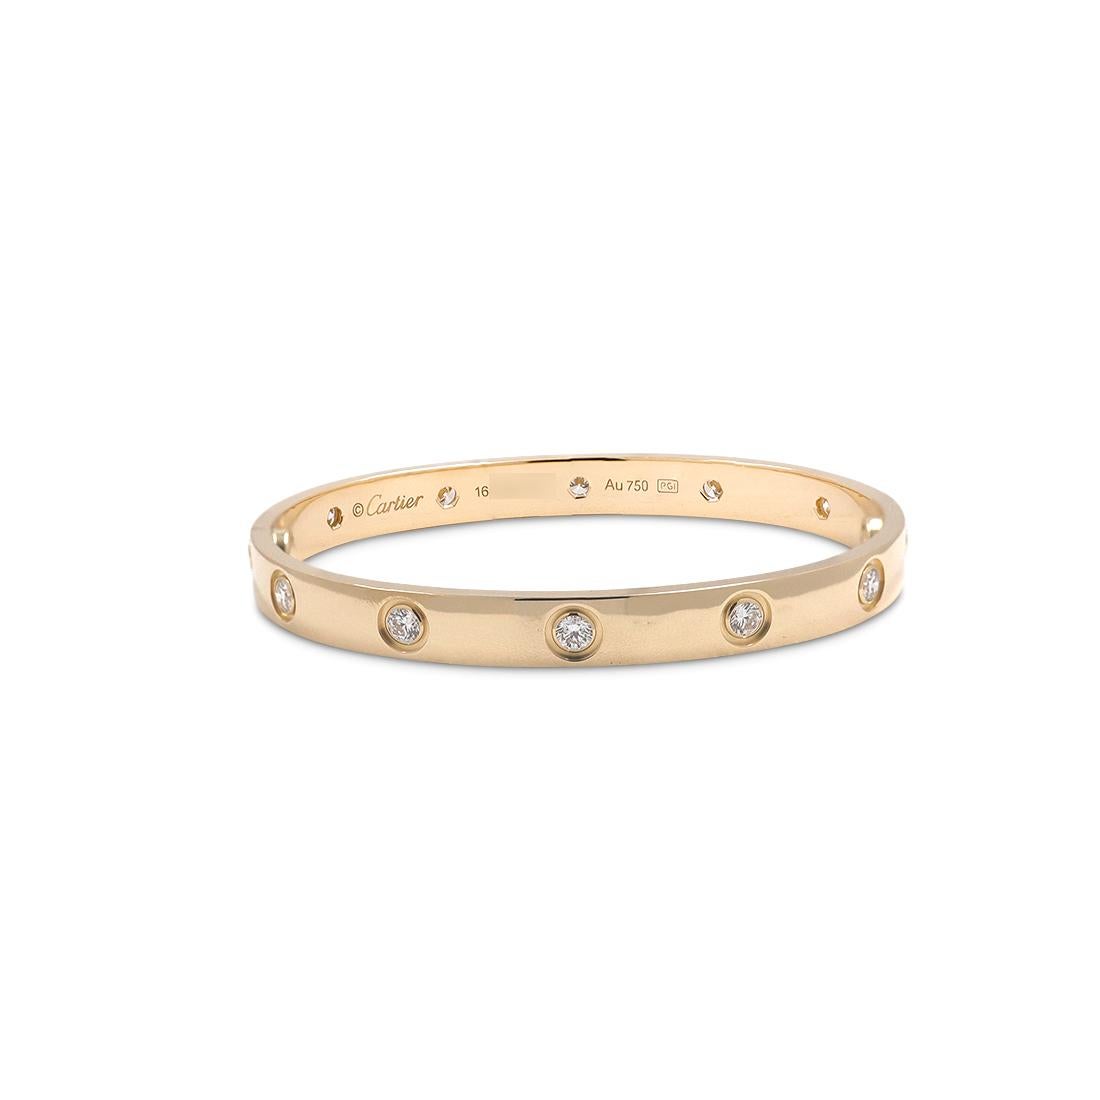 Authentic Cartier 'Love' bangle bracelet crafted in 18 karat yellow gold set with ten round brilliant cut diamonds (E-F in color, VS clarity) weighing an estimated 0.96 carats total. Signed Cartier, size 16, Au750, with serial number and hallmarks.